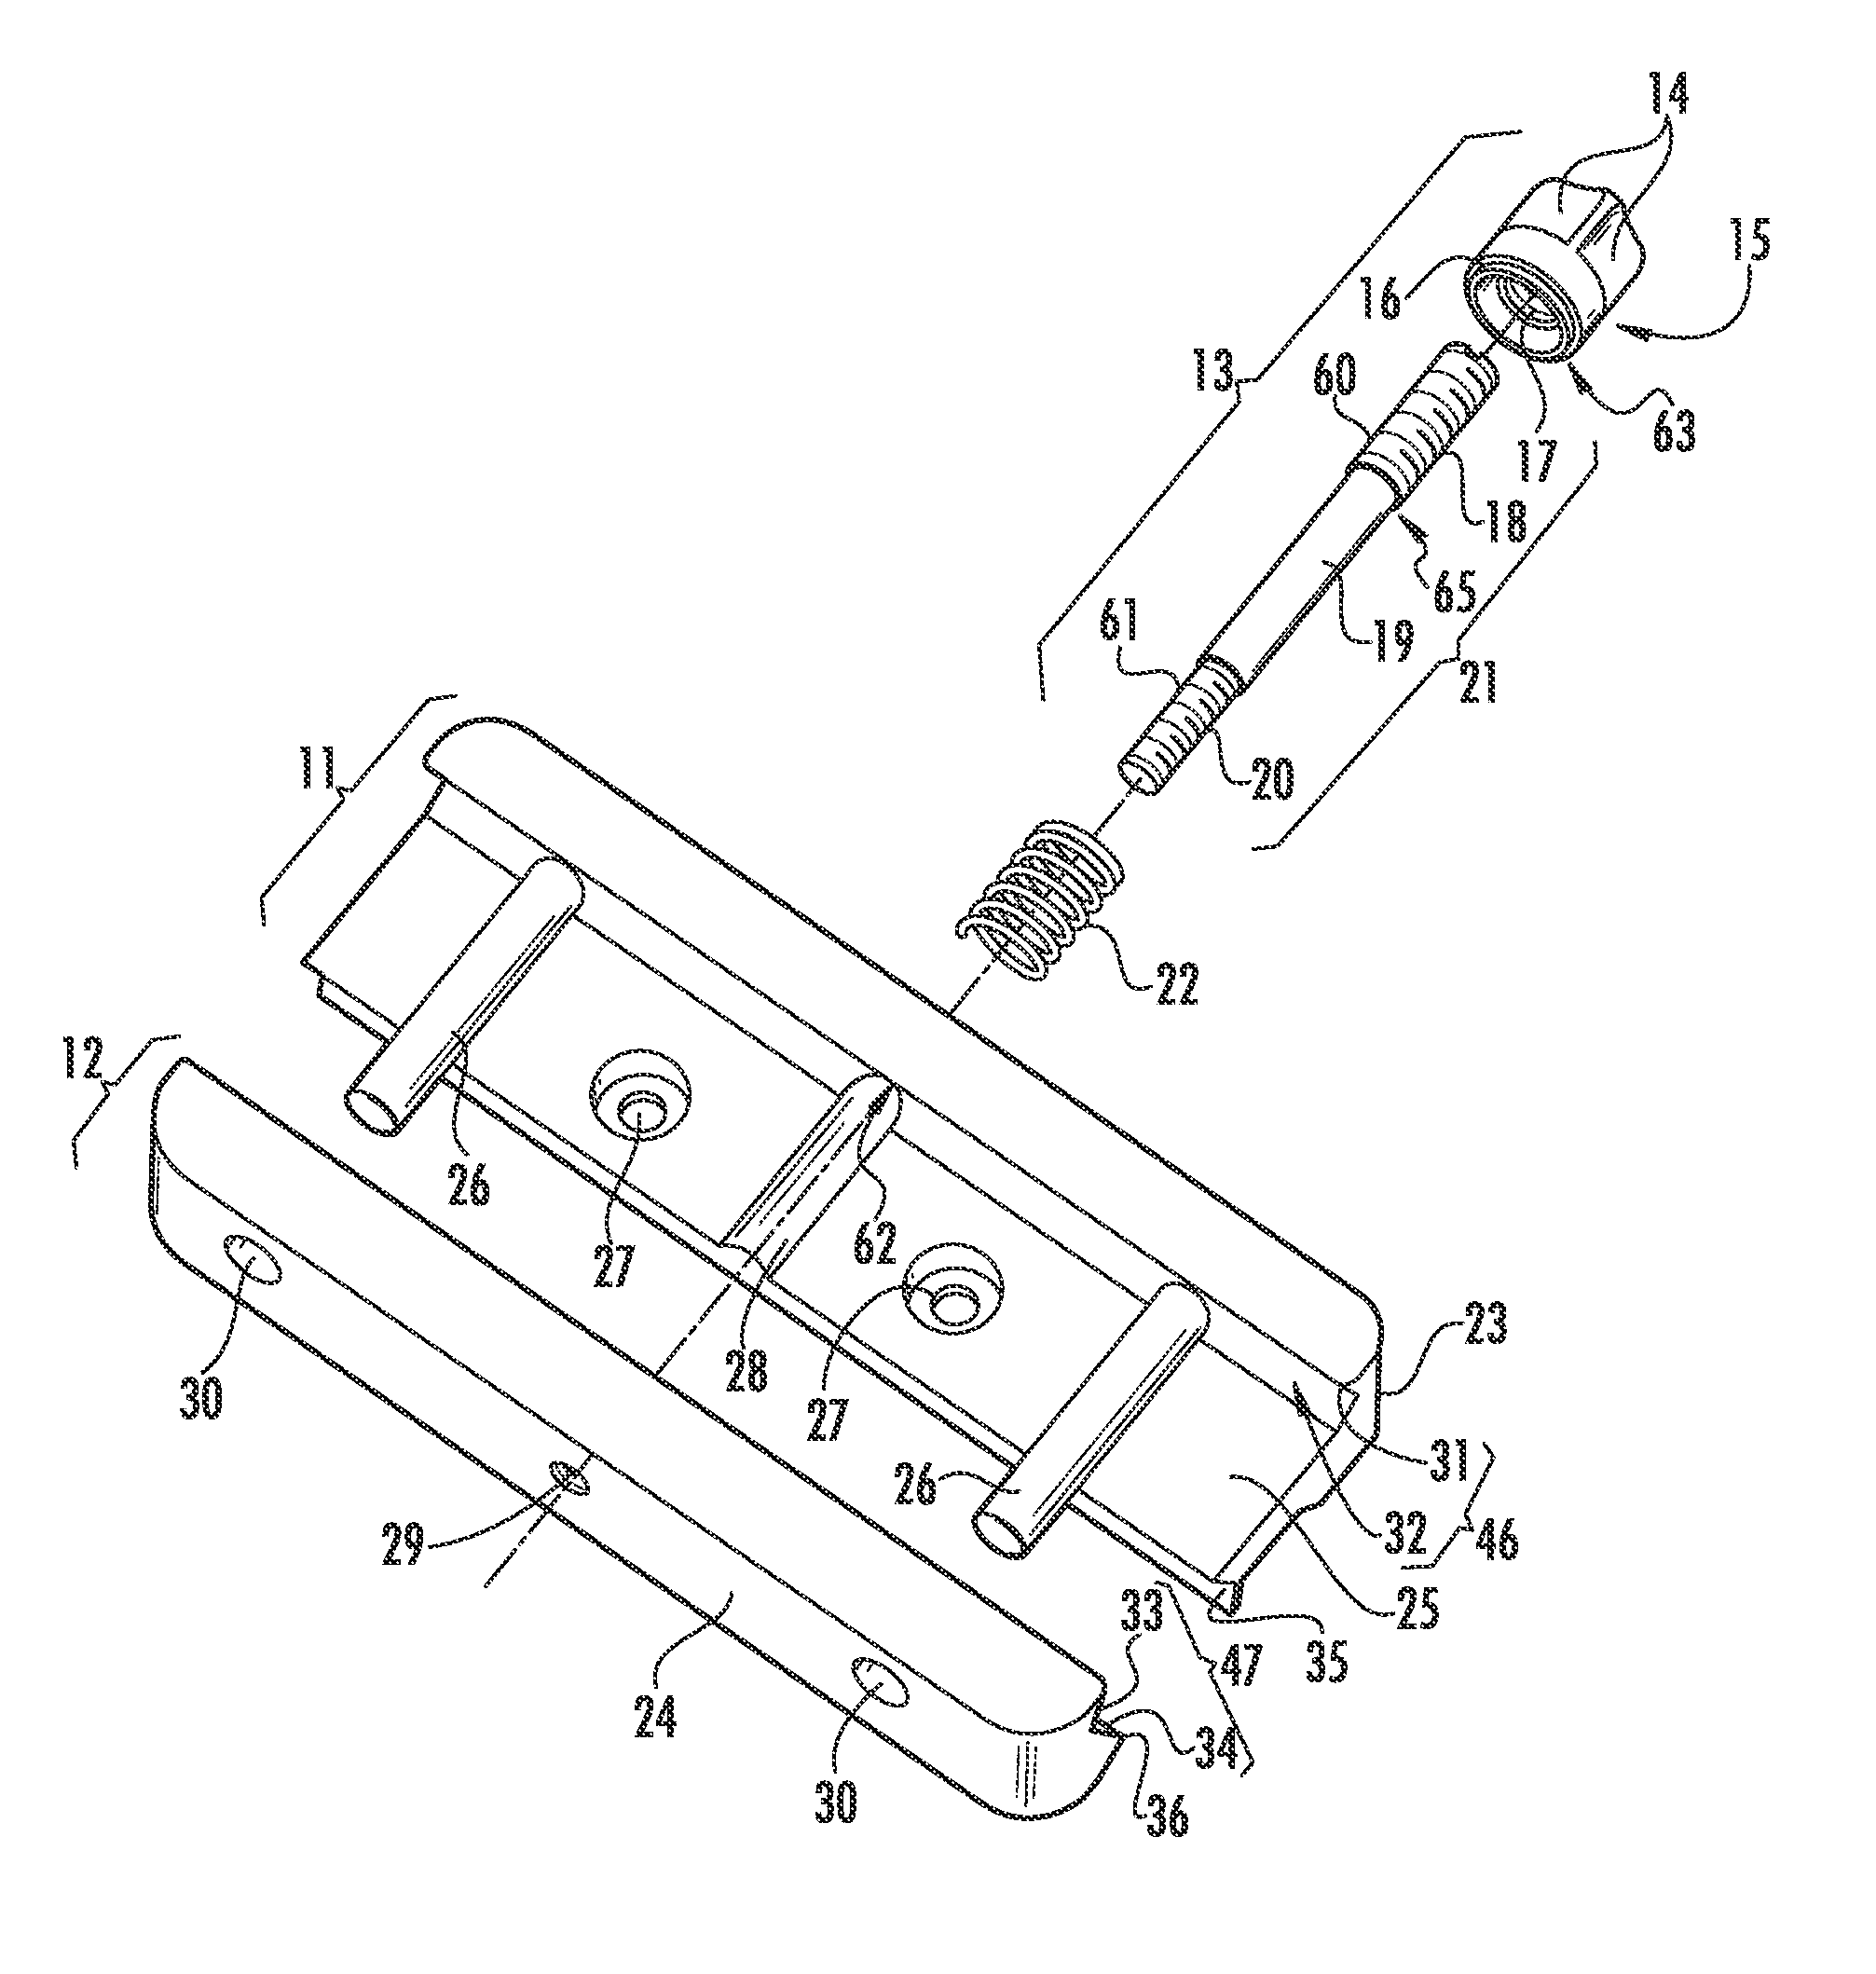 Mount adapter device utilizing a push system